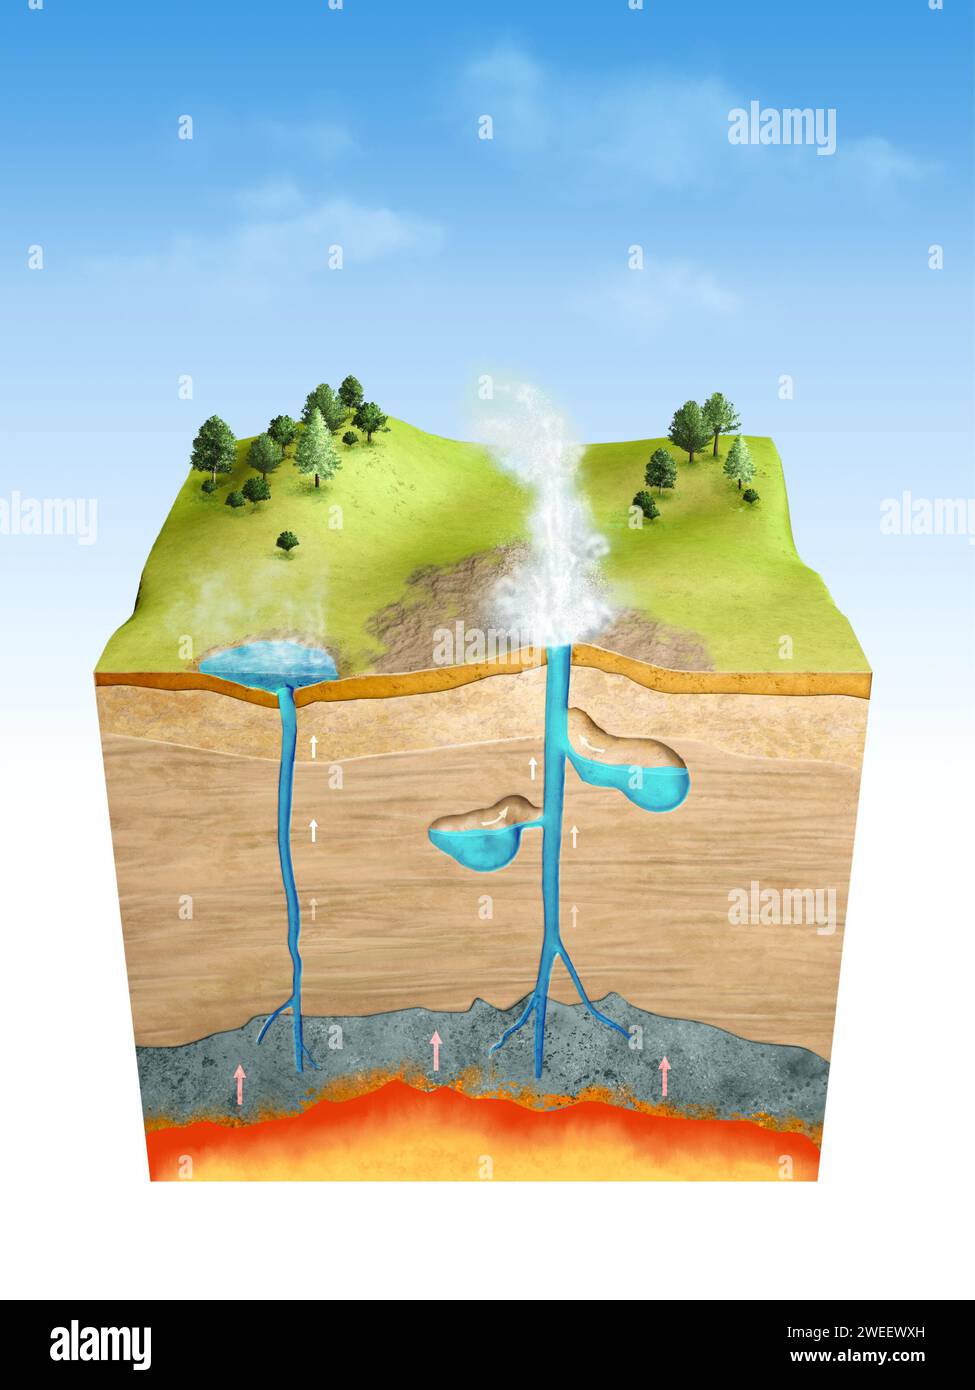 Cross-section of the Earth's crust showing how Geysers and hot springs work. Digital illustration, 3D render. Stock Photo